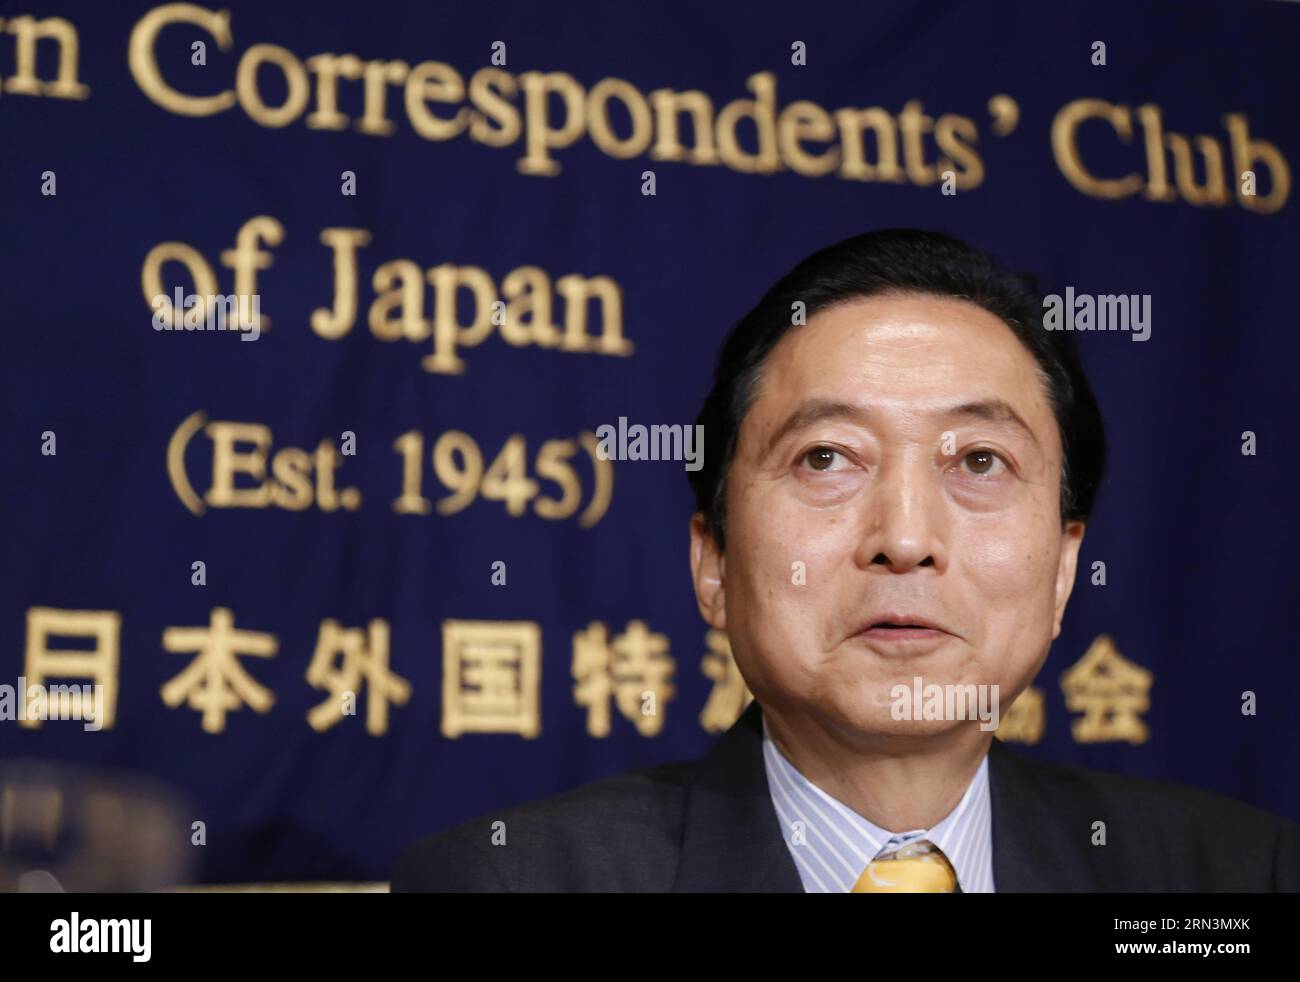 (150422) -- TOKYO, April 22, 2015 -- Former Japanese Prime Minister Yukio Hatoyama speaks during a press conference in Tokyo, Japan, April 22, 2015. Hatoyama called on Prime Minister Shinzo Abe to follow the Murayama Statement and to include the key words in his war anniversary statement, adding that he has considerable anxieties that Abe s statement may increase tensions among peoples of the Asian region. ) JAPAN-TOKYO-POLITICS-YUKIO HATOYAMA-PRESS CONFERENCE Stringer PUBLICATIONxNOTxINxCHN   Tokyo April 22 2015 Former Japanese Prime Ministers Yukio Hatoyama Speaks during a Press Conference i Stock Photo